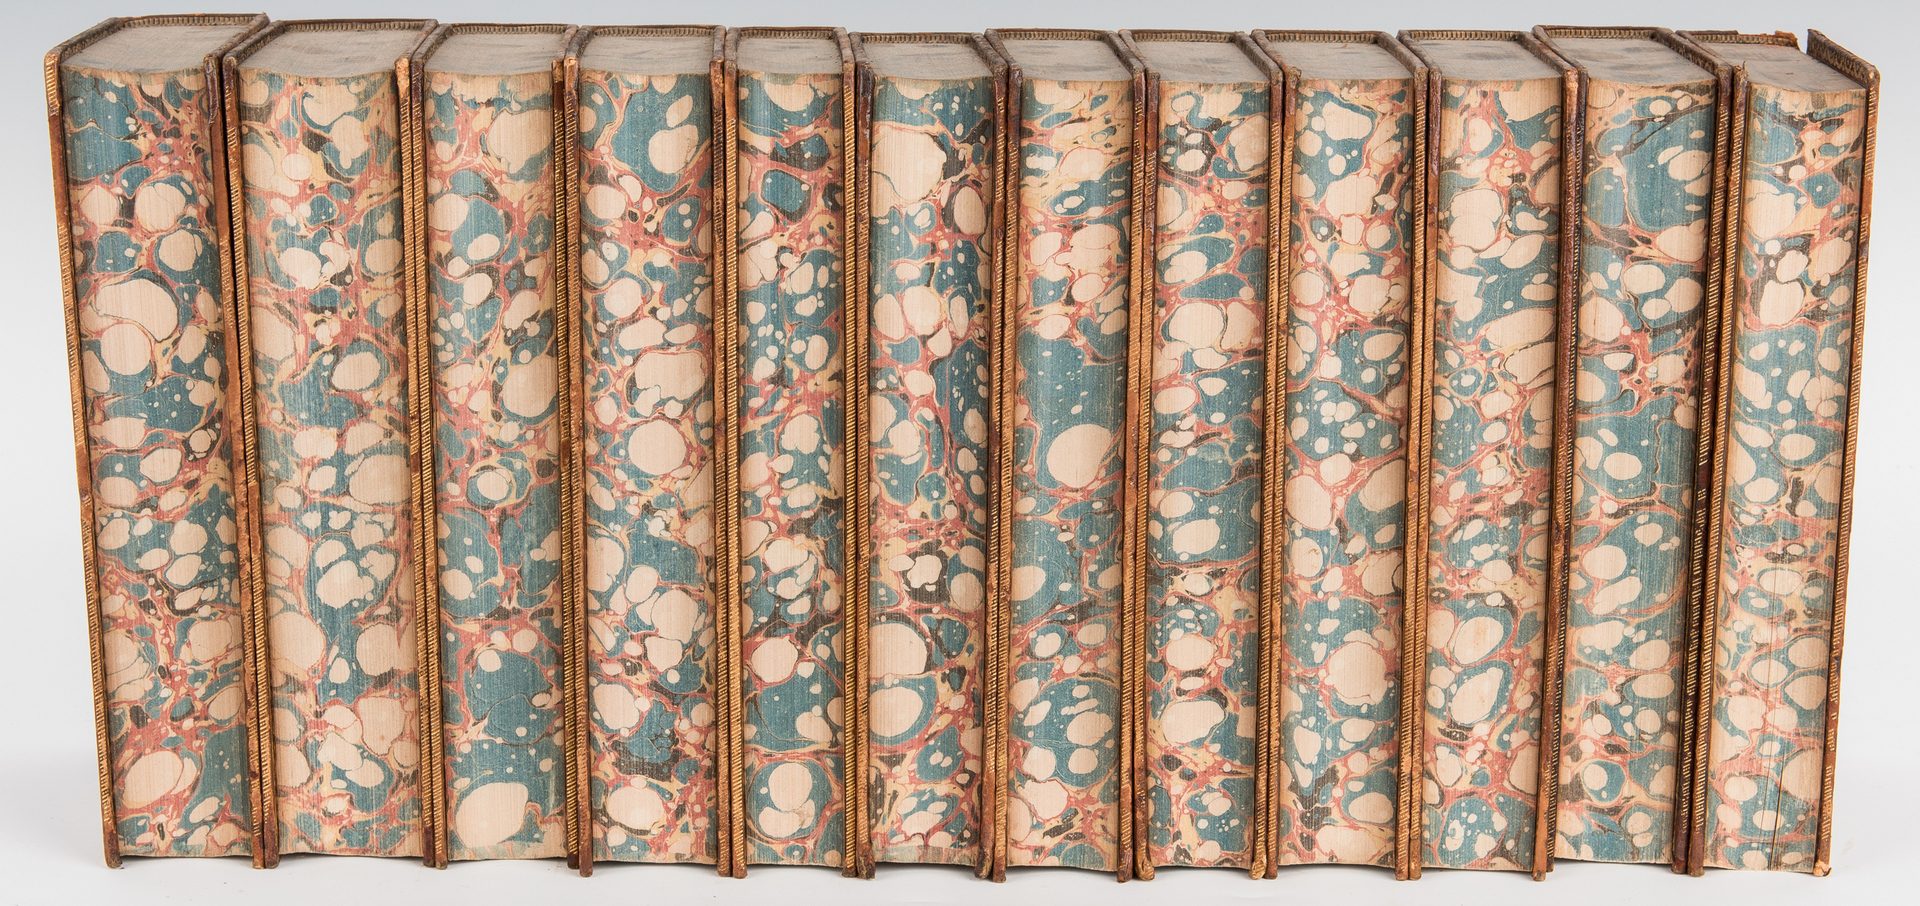 Lot 286: Froude's History of England, 12 Vols., 1870